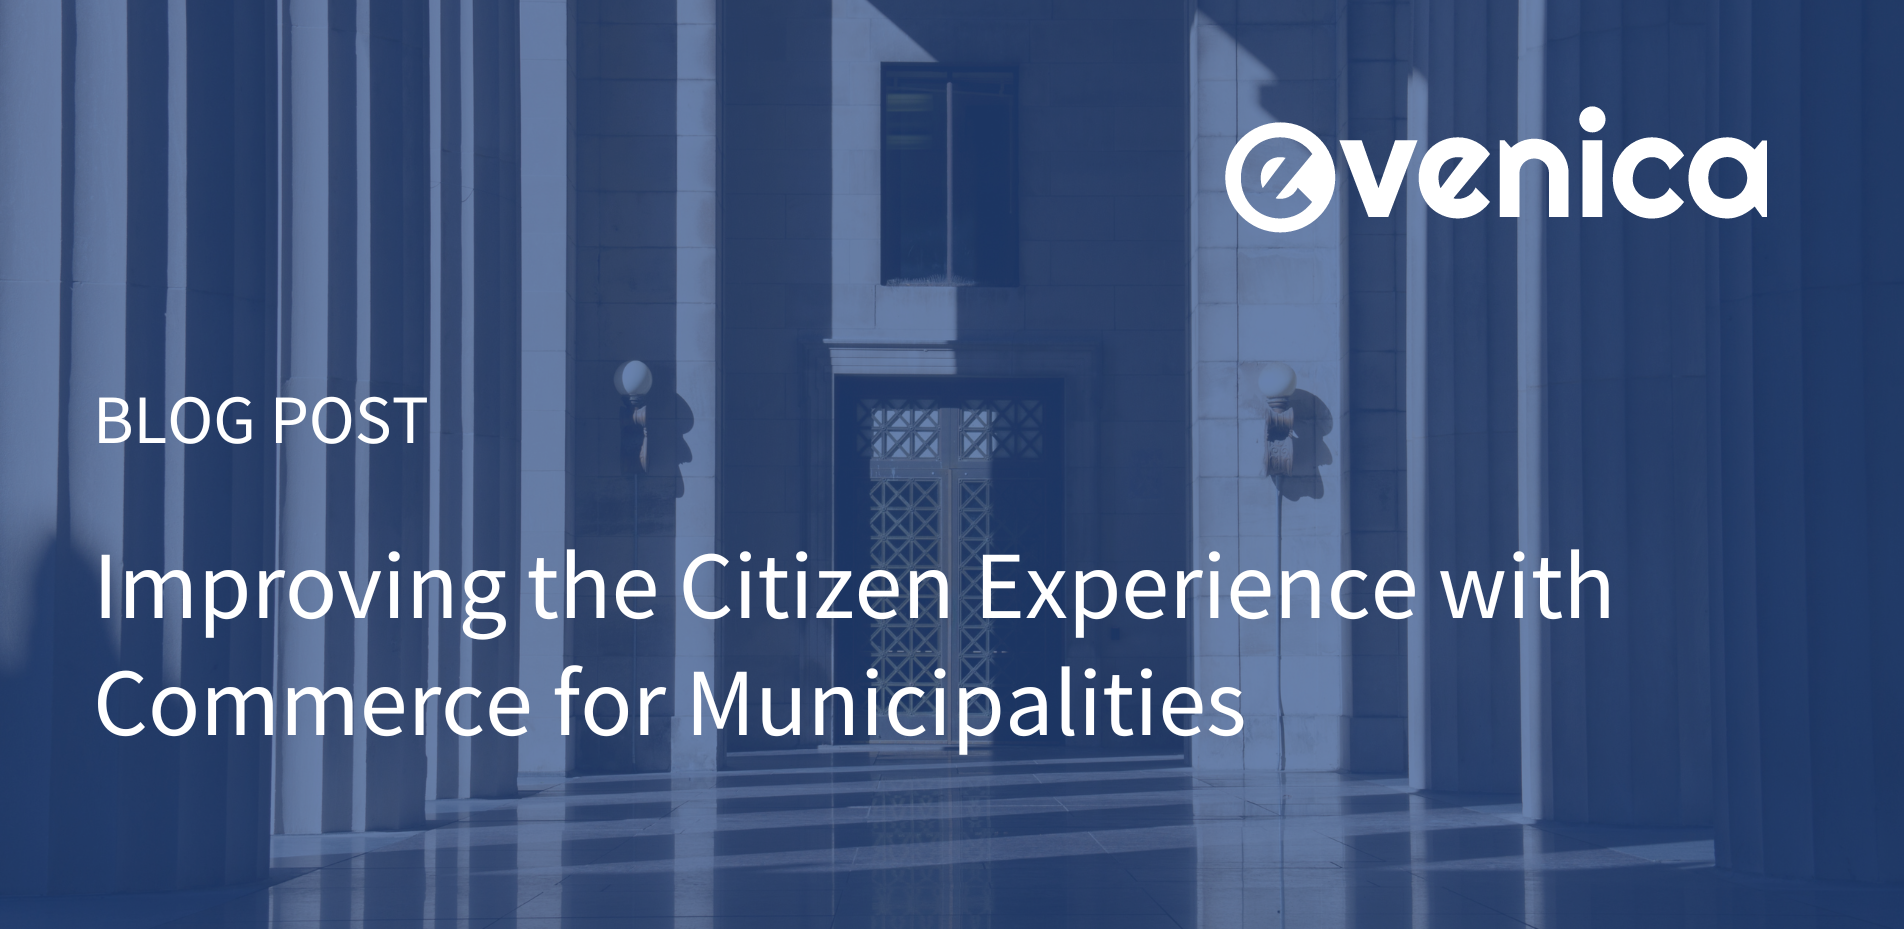 Improving the Citizen Experience with Commerce for Municipalities - Evenica